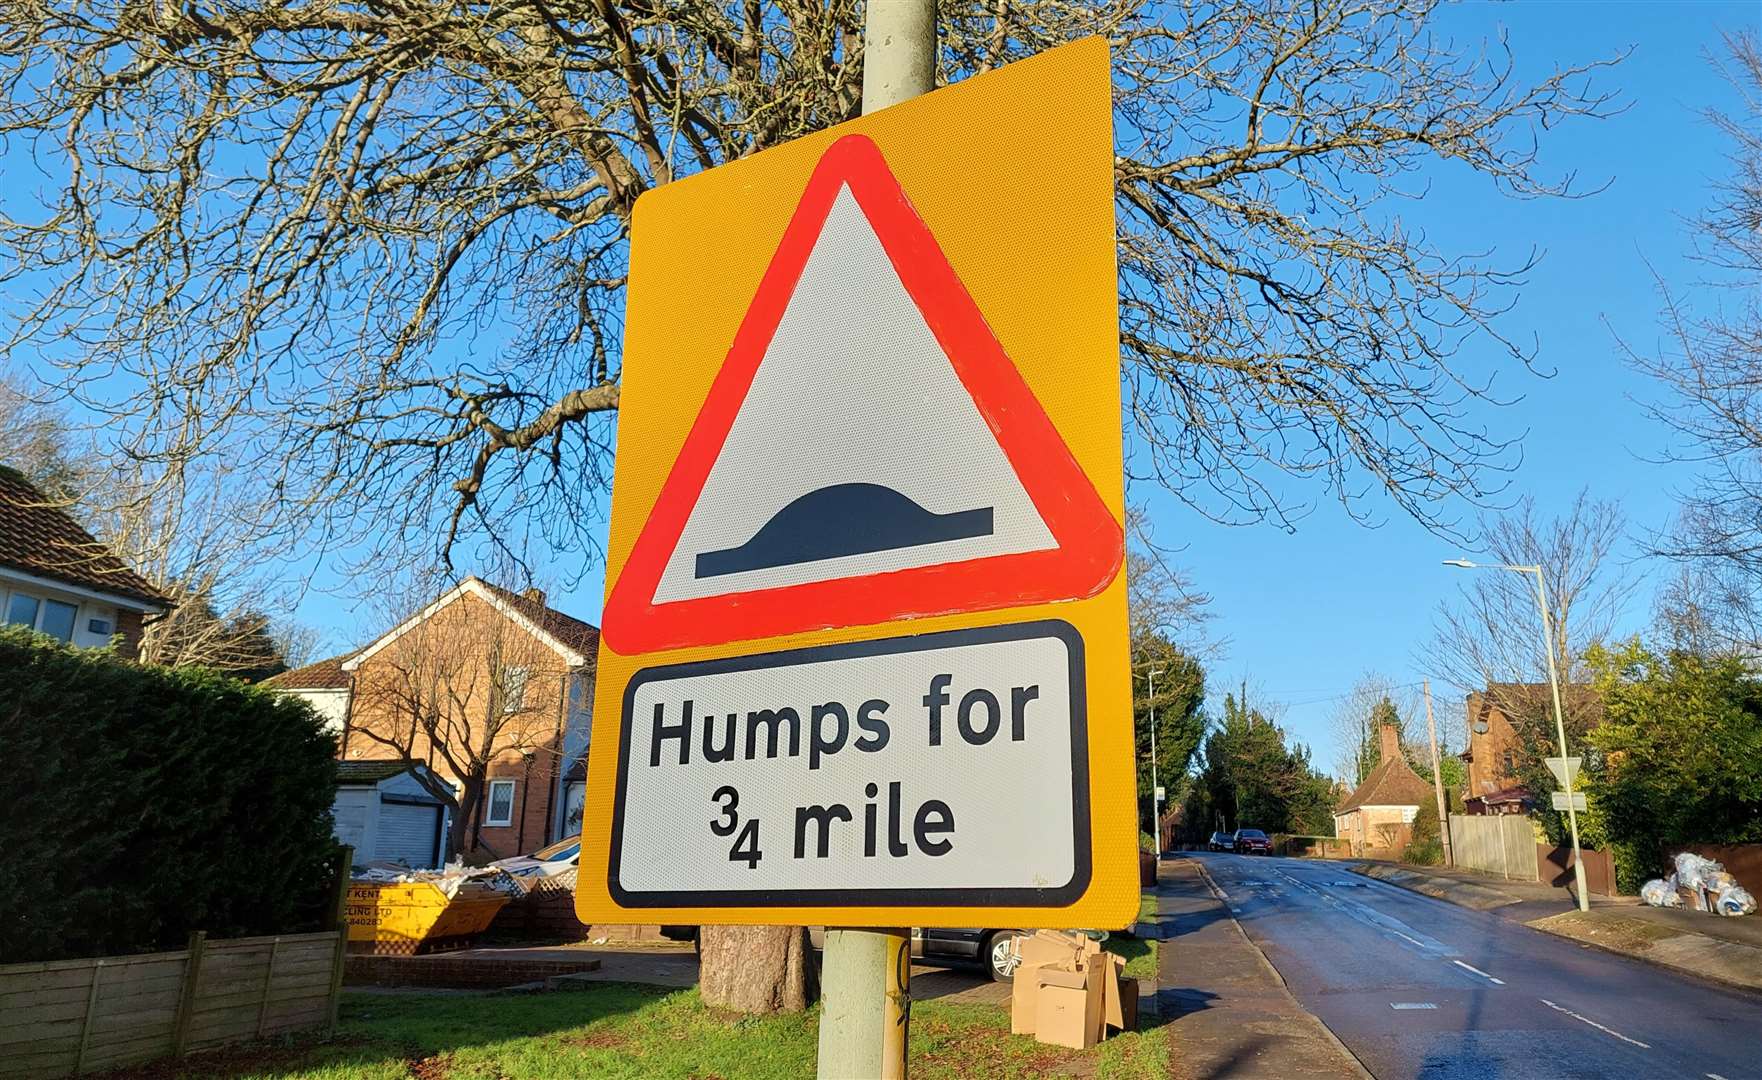 There are 16 sets of humps along Ulley Road and The Street